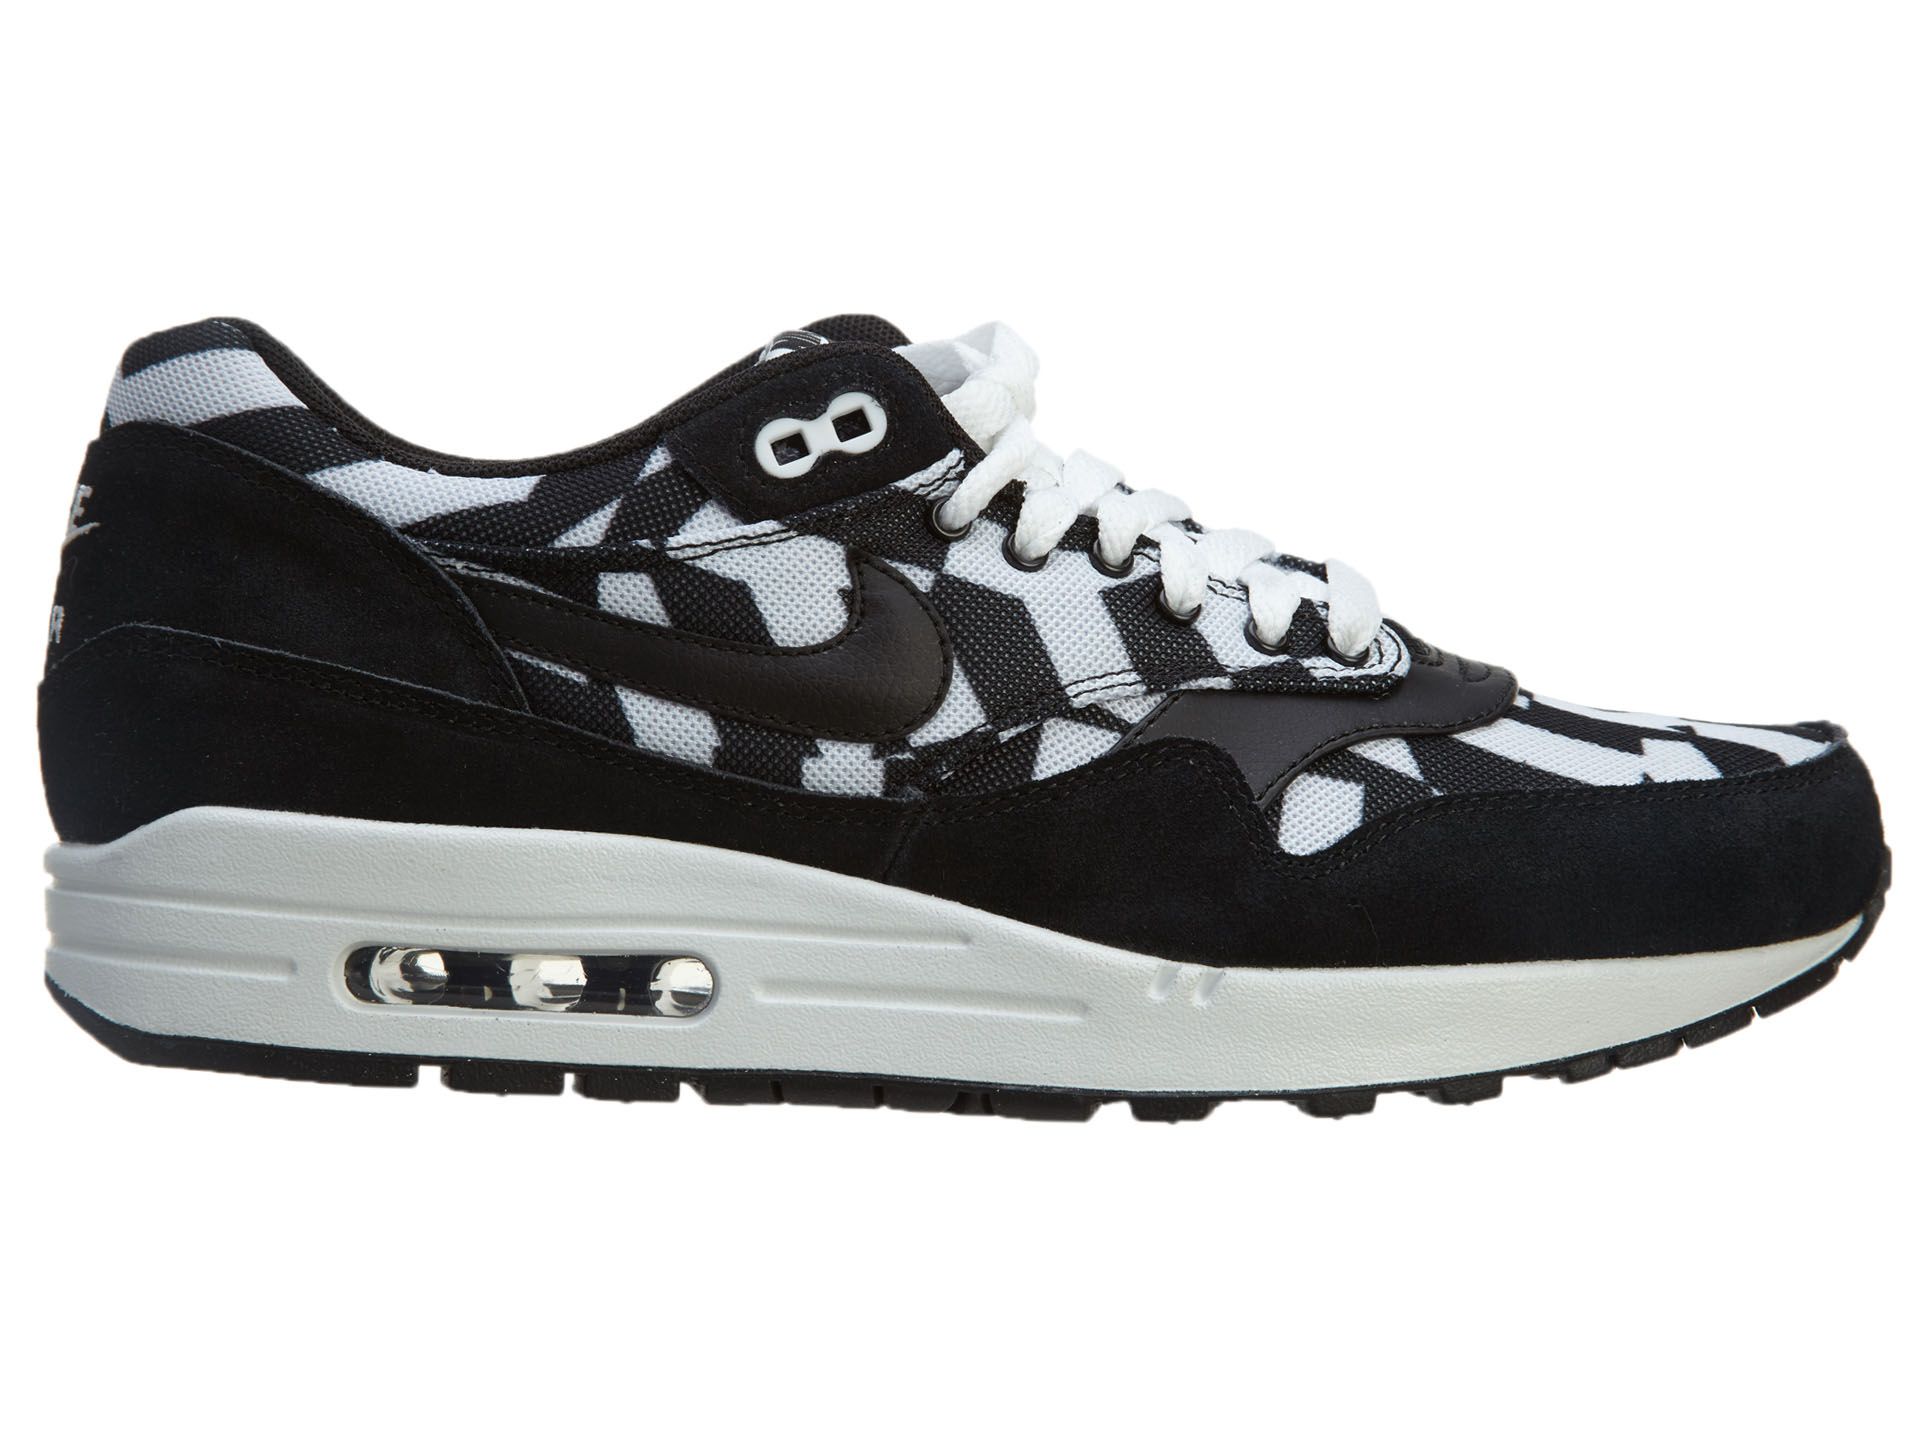 men's nike air max 1 gpx running shoes